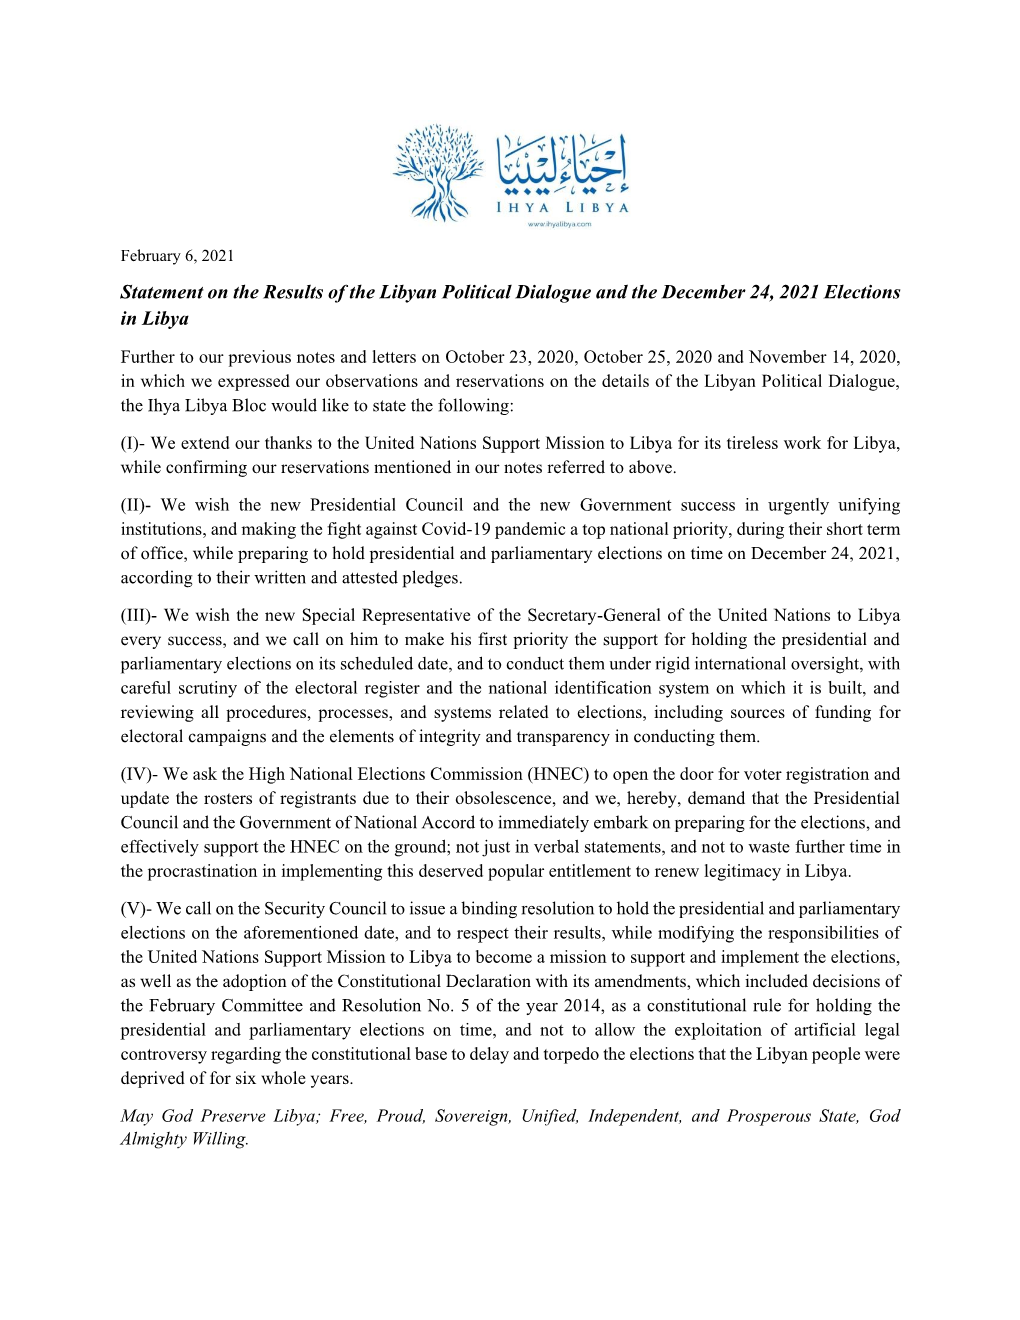 Statement on the Results of the Libyan Political Dialogue and the December 24, 2021 Elections in Libya